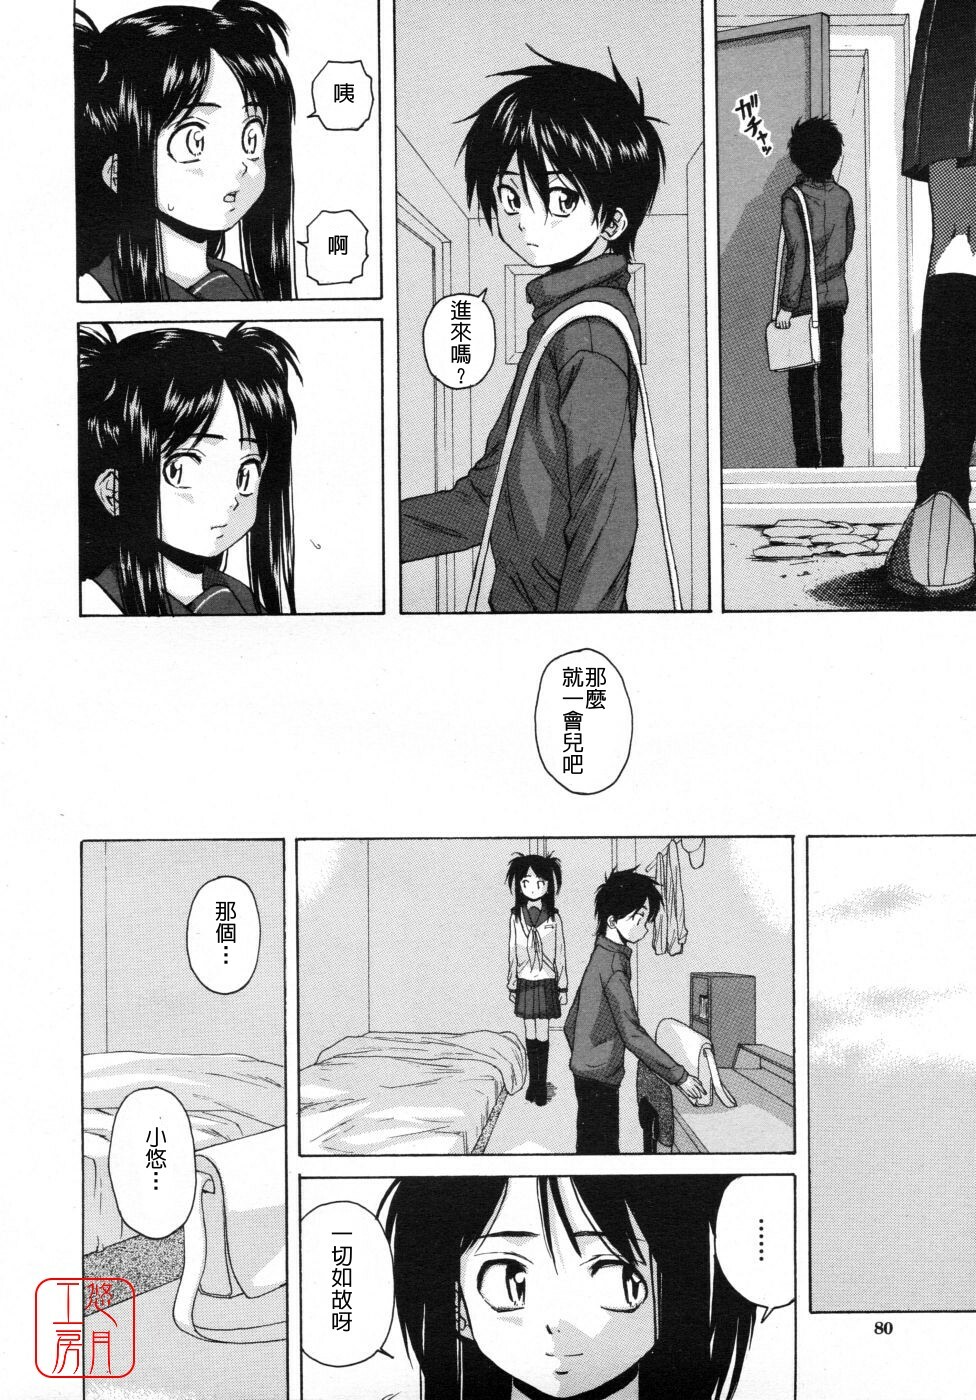 [Fuuga] Girl Friend 2 (Chinese) page 20 full